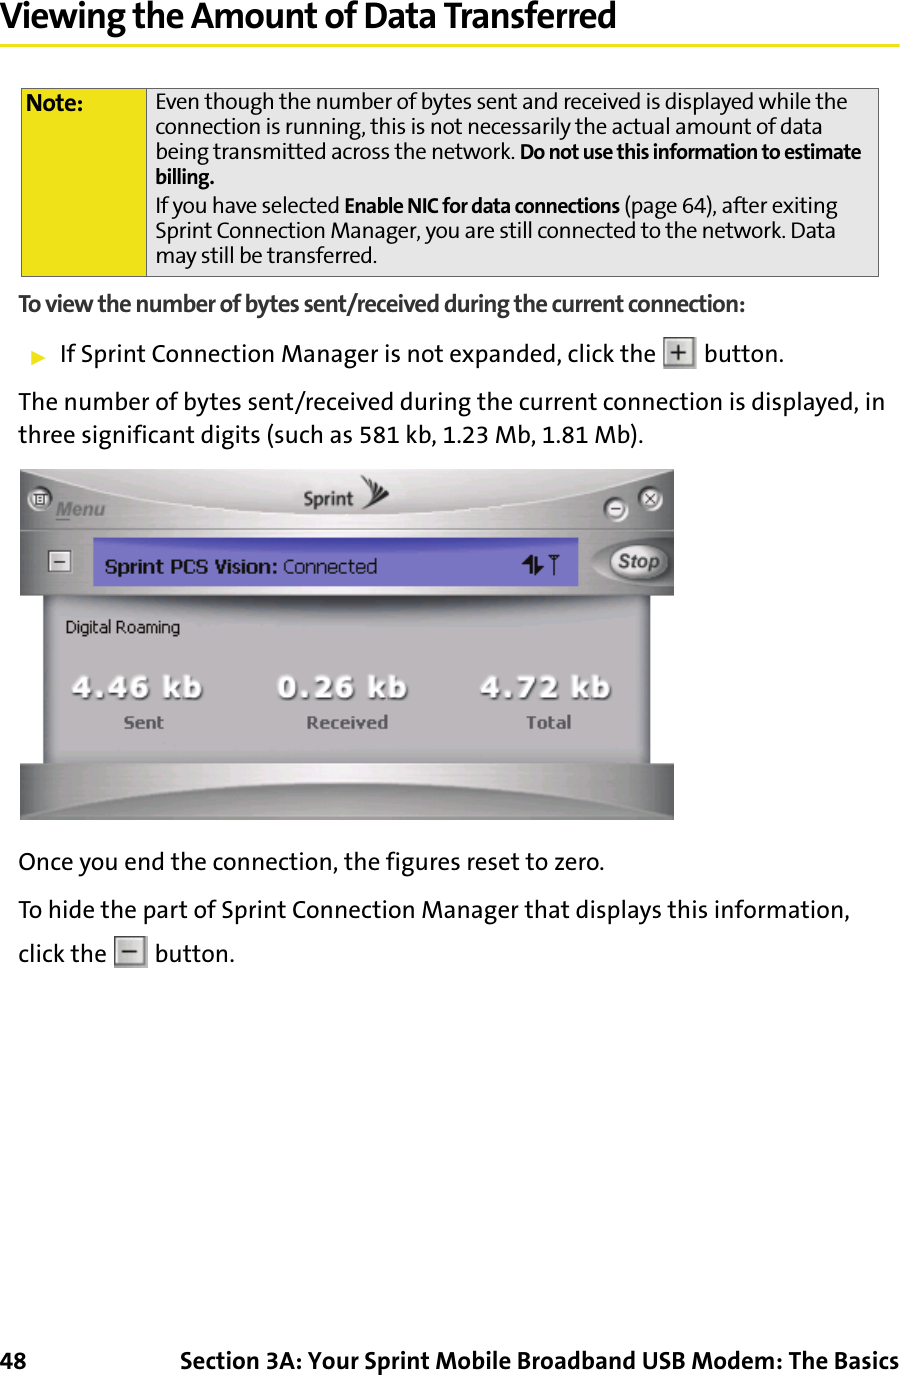 48 Section 3A: Your Sprint Mobile Broadband USB Modem: The BasicsViewing the Amount of Data TransferredTo view the number of bytes sent/received during the current connection:䊳If Sprint Connection Manager is not expanded, click the   button.The number of bytes sent/received during the current connection is displayed, in three significant digits (such as 581 kb, 1.23 Mb, 1.81 Mb).Once you end the connection, the figures reset to zero.To hide the part of Sprint Connection Manager that displays this information, click the   button.Note: Even though the number of bytes sent and received is displayed while the connection is running, this is not necessarily the actual amount of data being transmitted across the network. Do not use this information to estimate billing.If you have selected Enable NIC for data connections (page 64), after exiting Sprint Connection Manager, you are still connected to the network. Data may still be transferred.